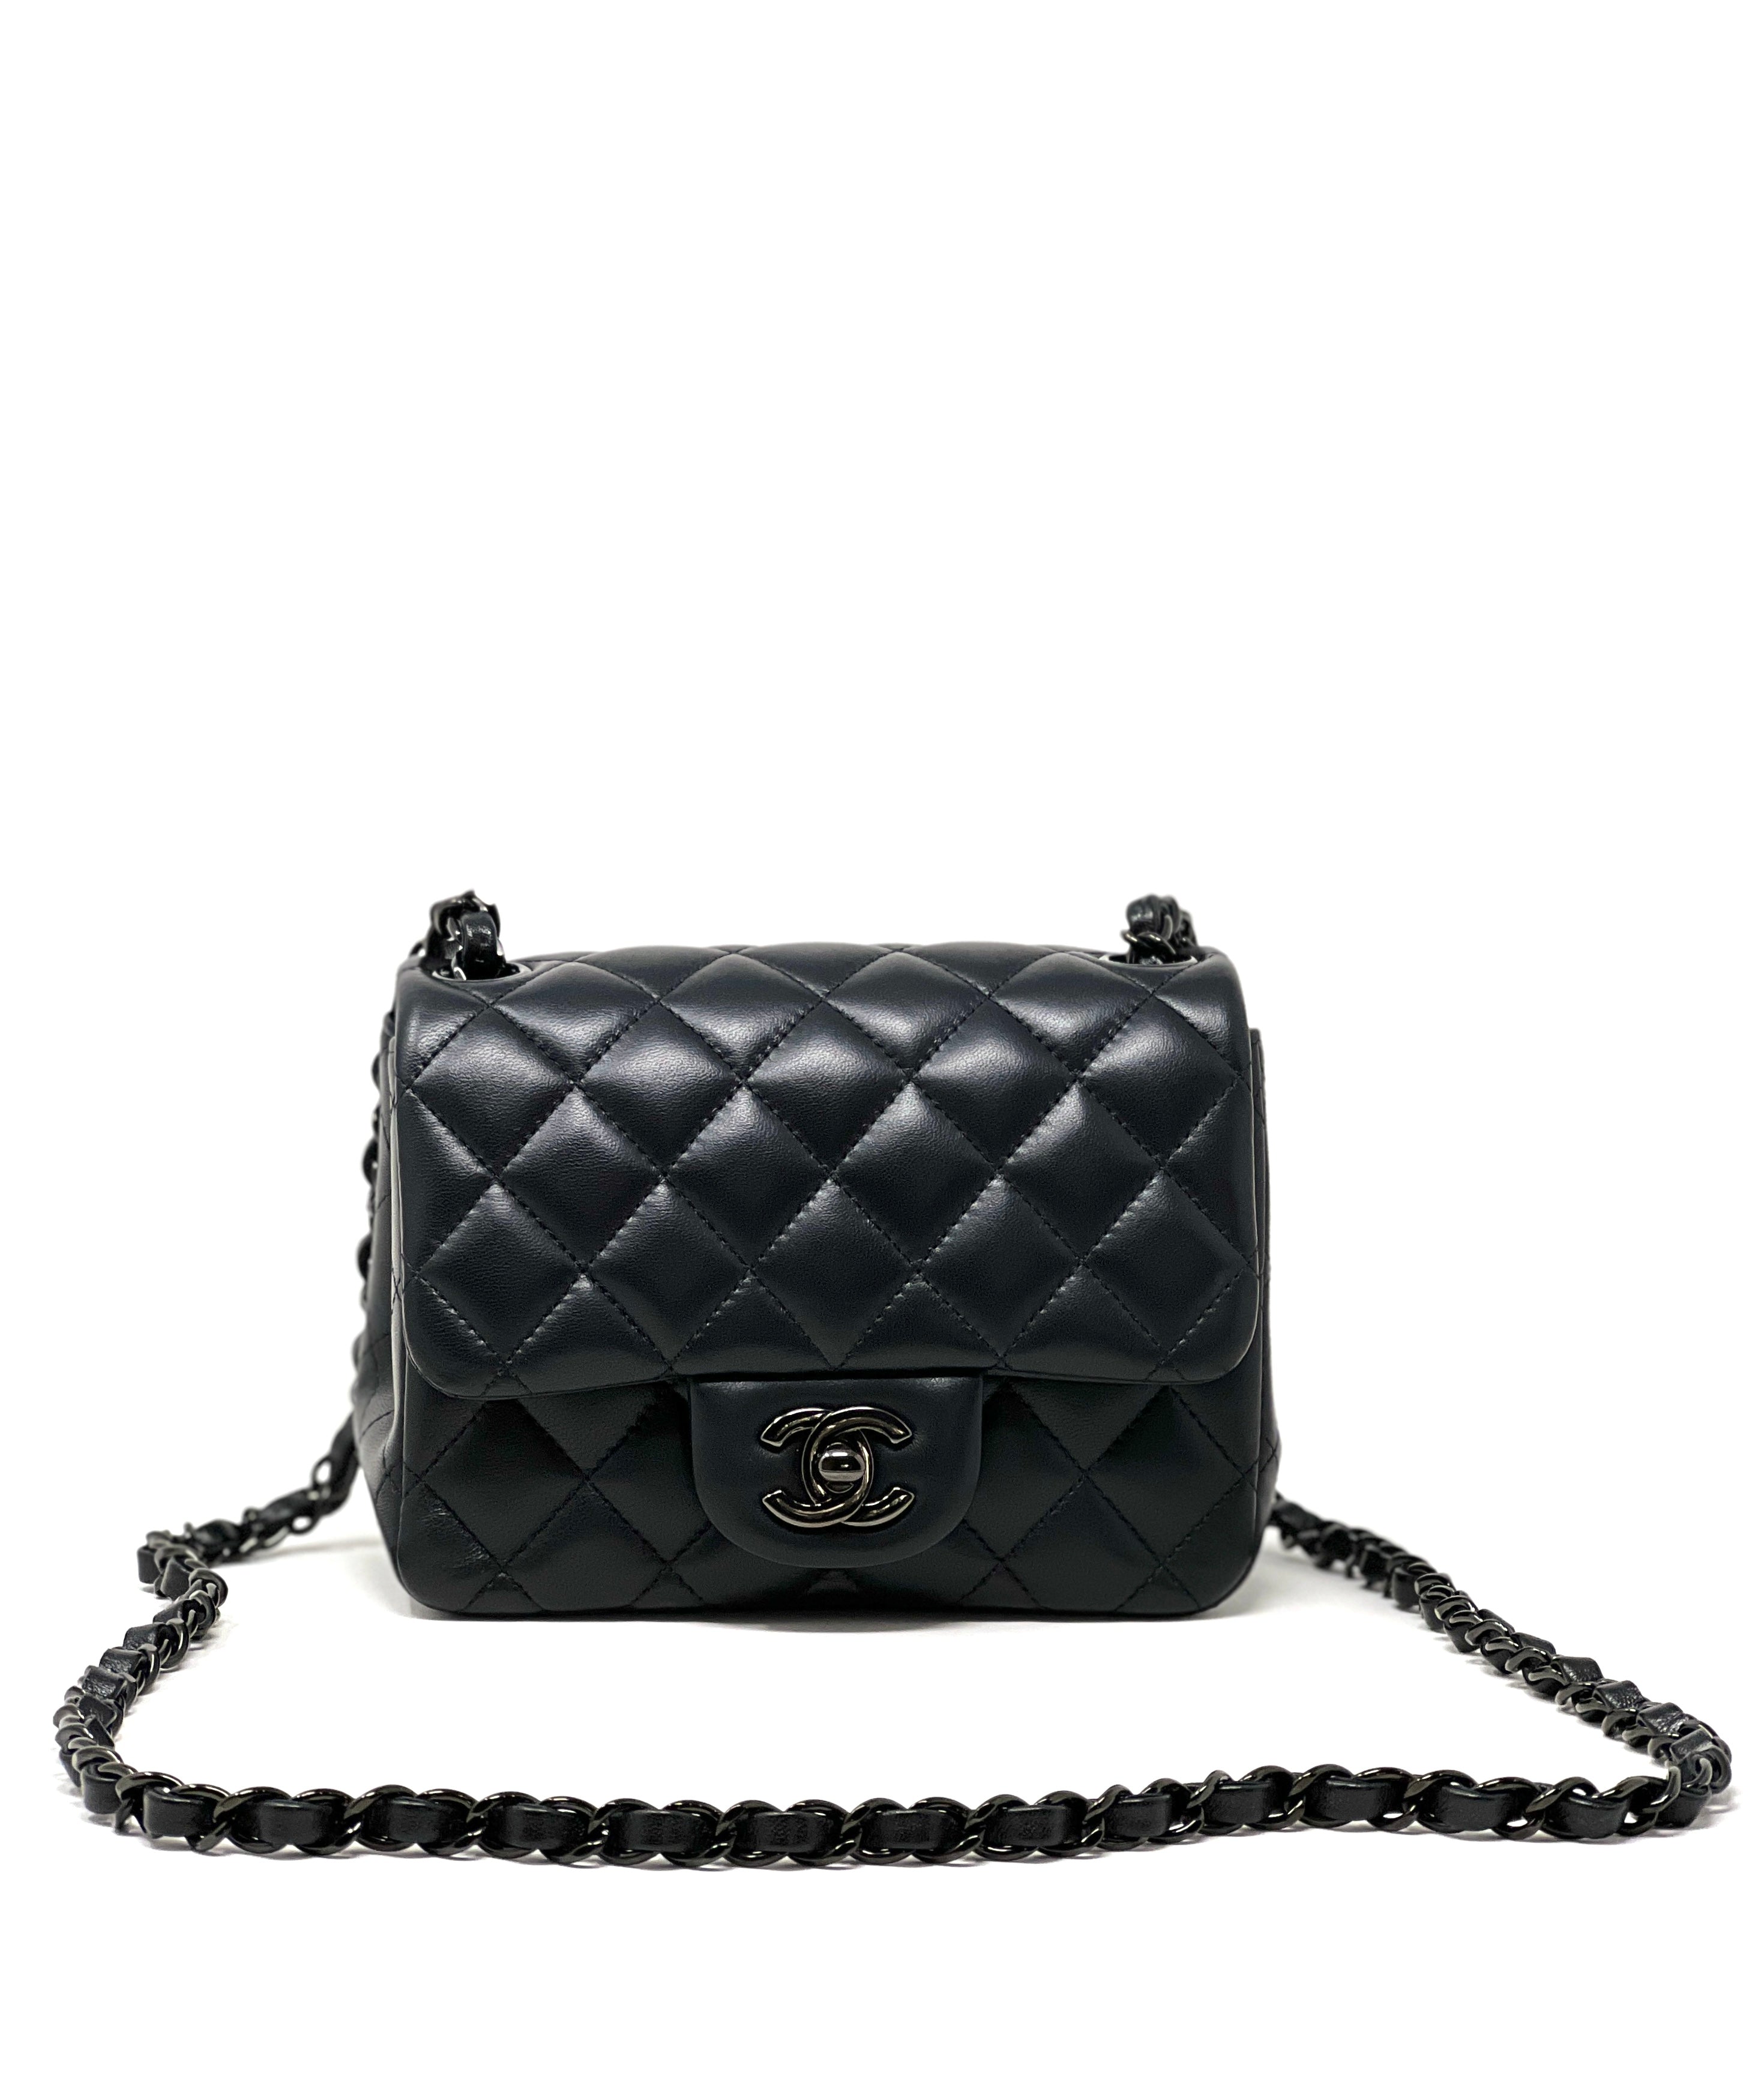 Chanel Classic Flap Small Square Bag – The Hosta